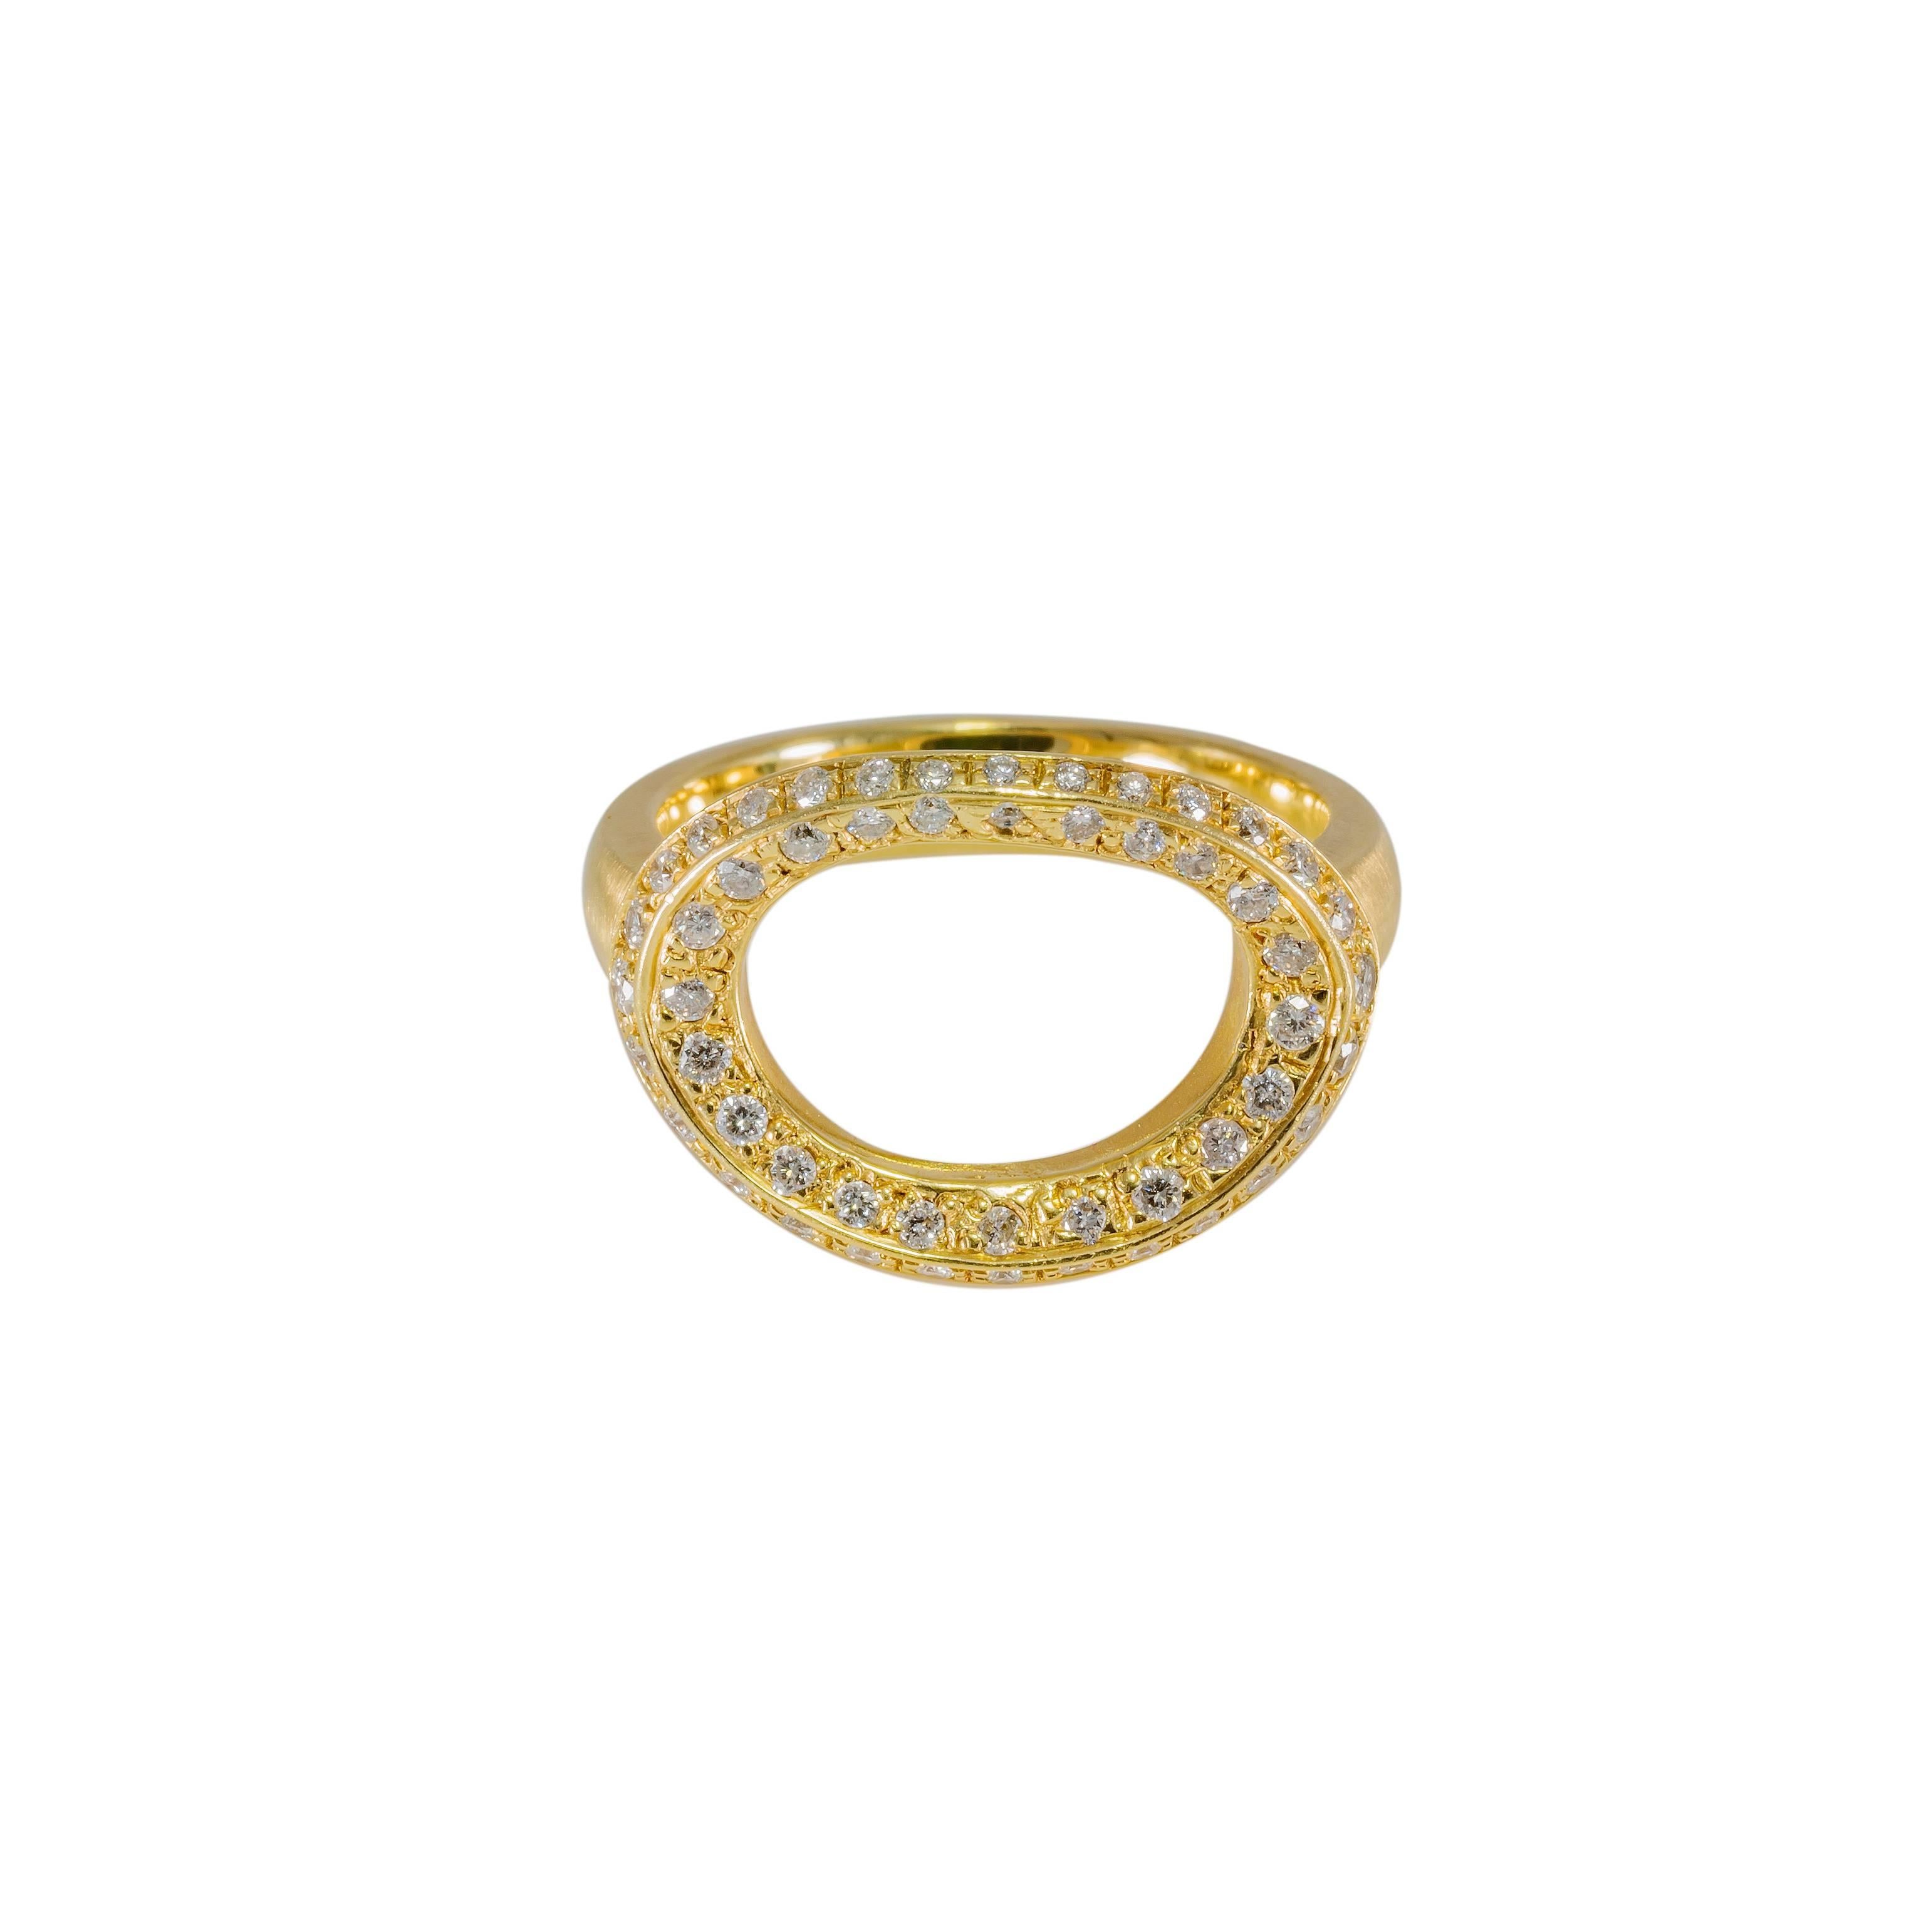 This open oval is set with a multitude of shimmering diamonds to create a stunning modern design. The total weigh of the diamonds is aprox. 1.33 tw. The ring is a size 7.  The open oval is curved to the shape of your finger for maximum comfort and